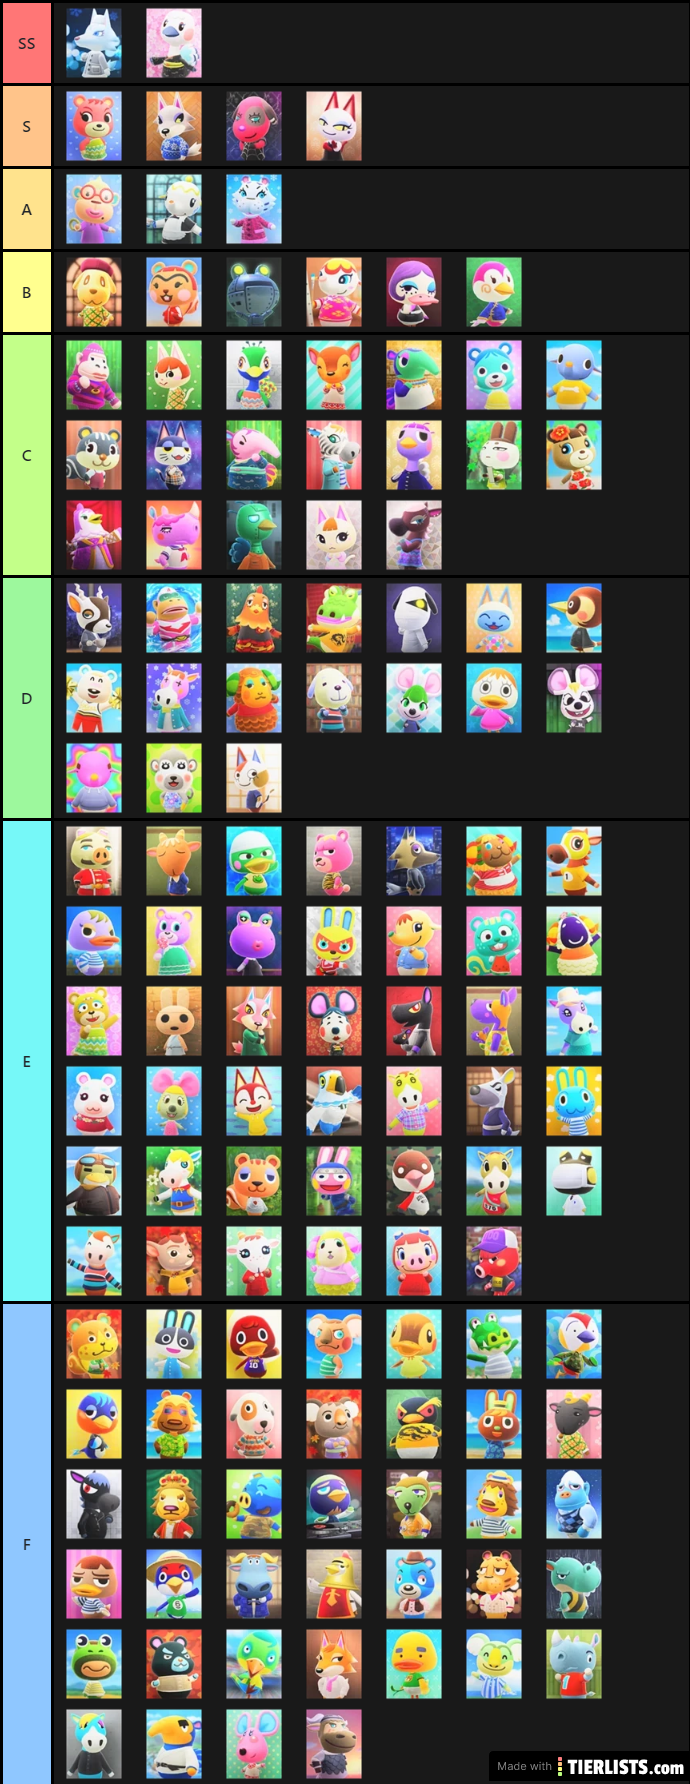 Acnh Villager List With Pictures Acnh Villager Tier List